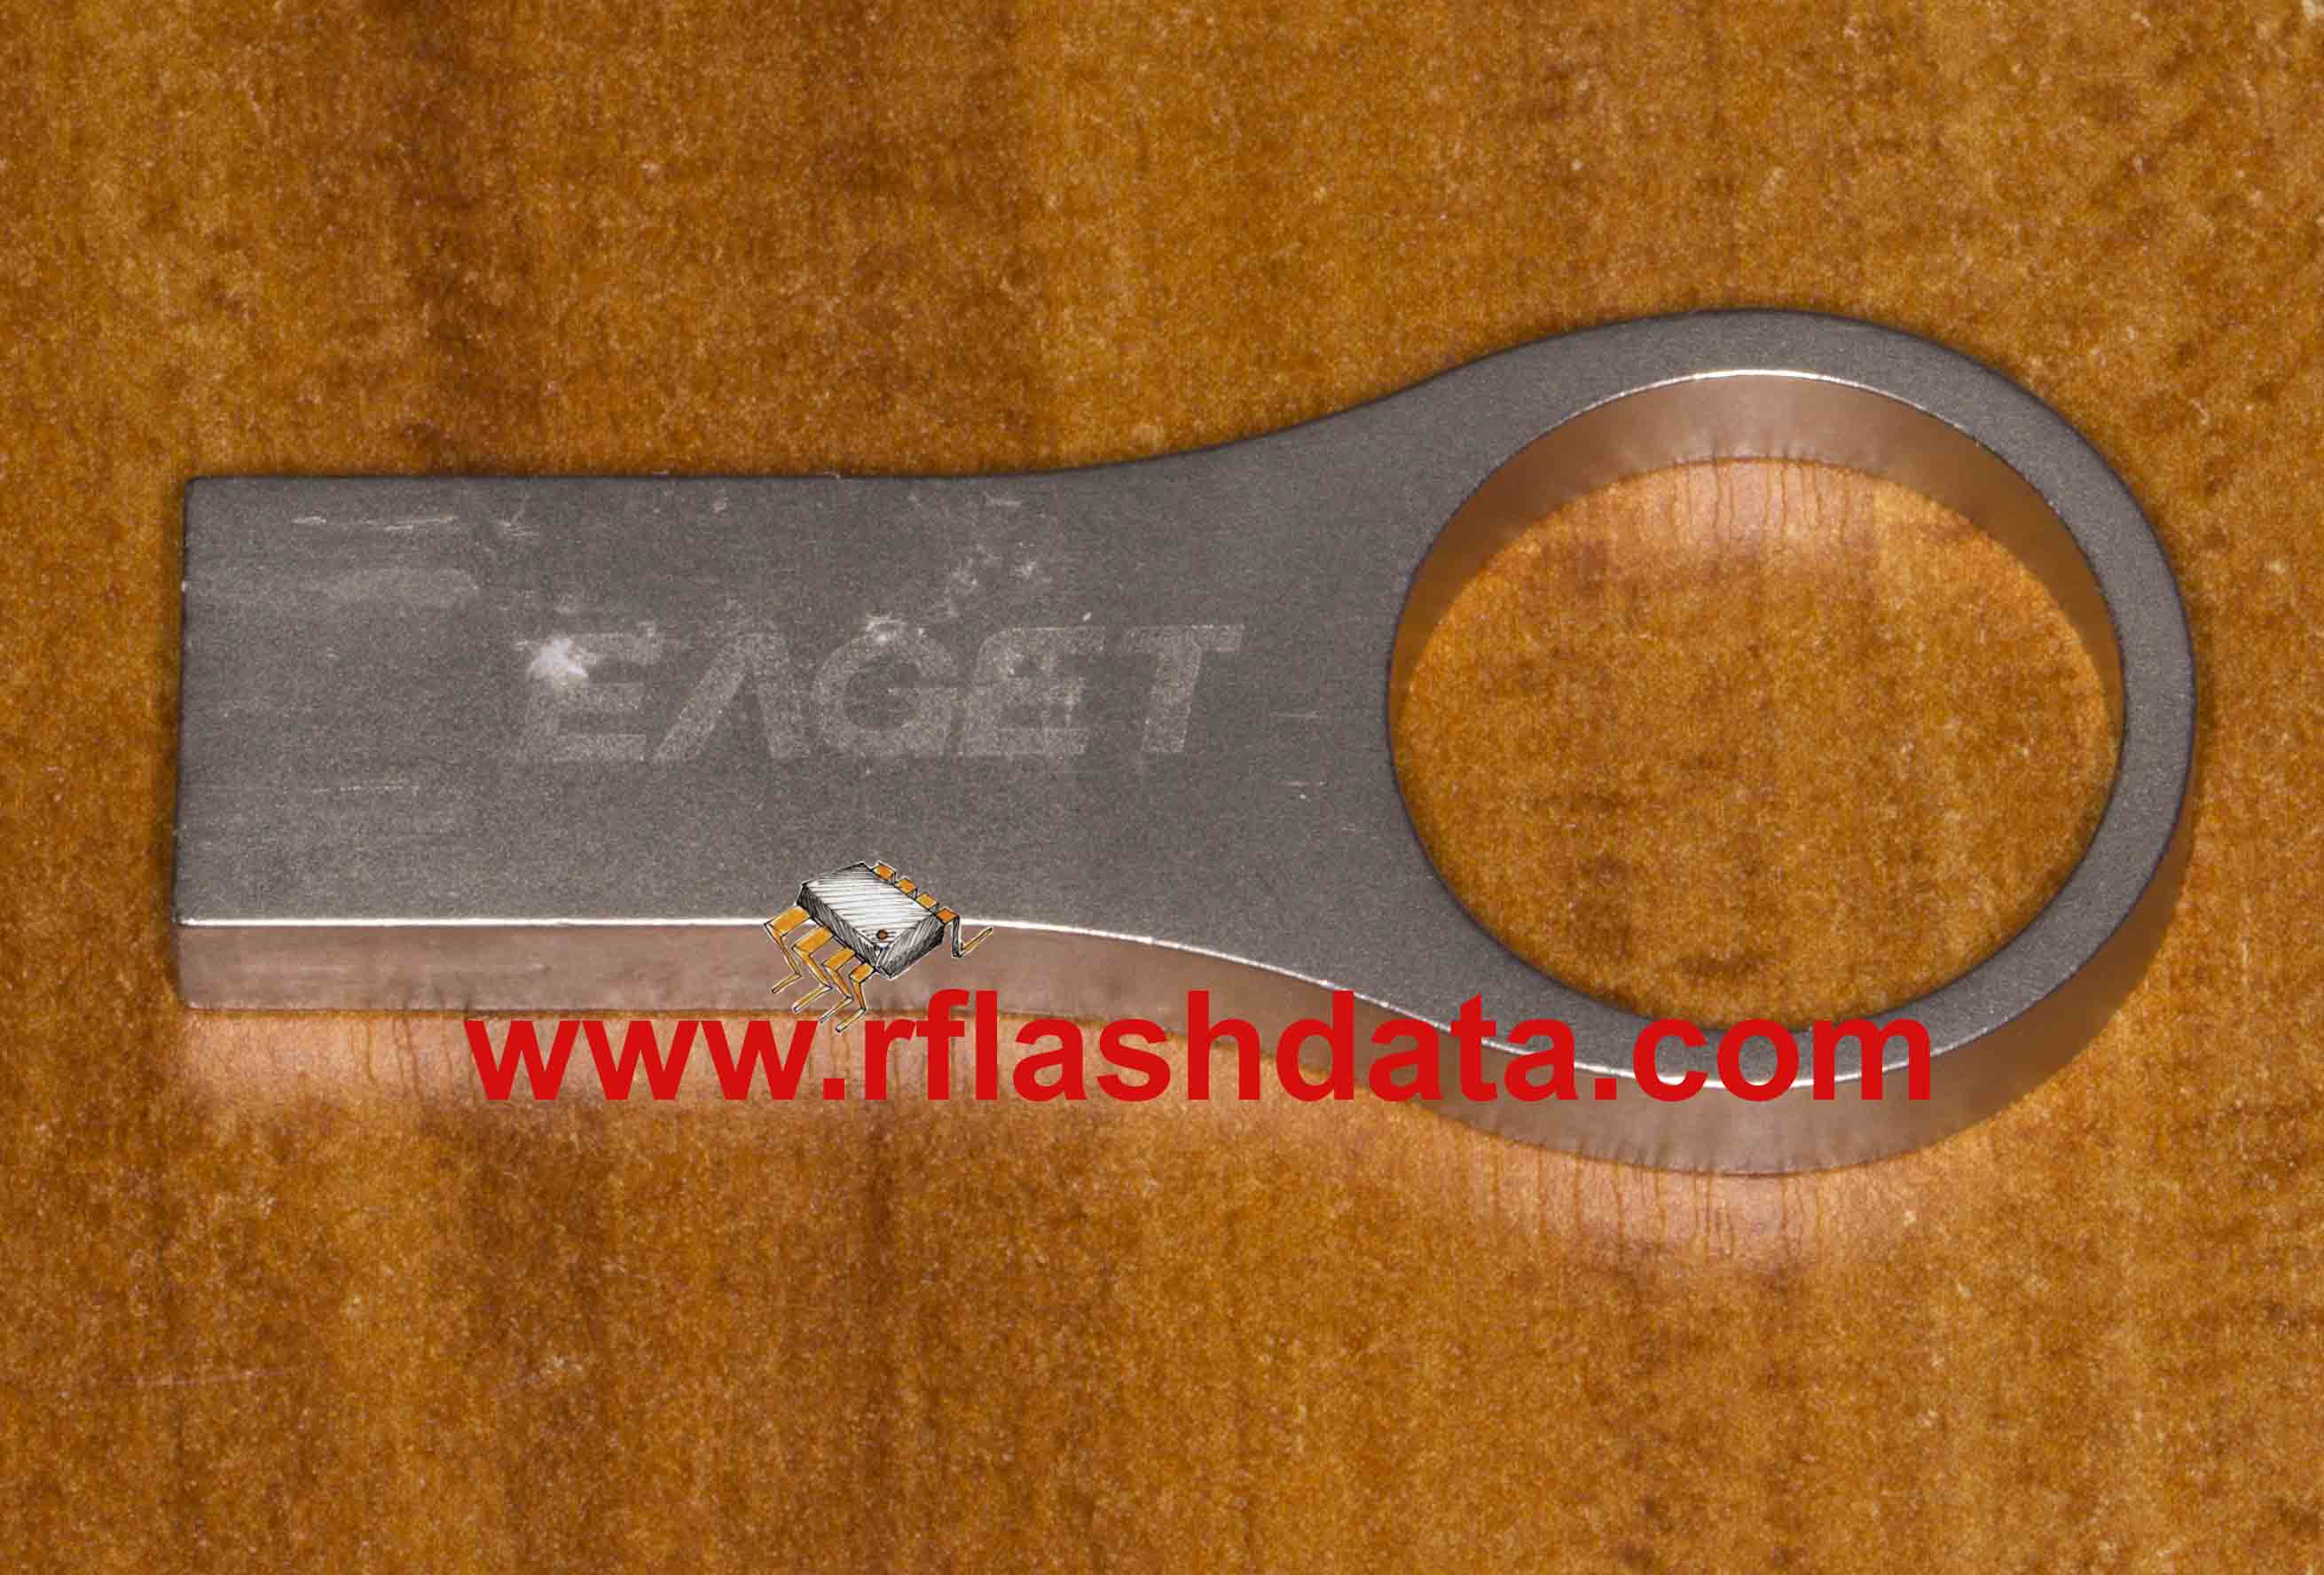 Eaget flash drive data recovery